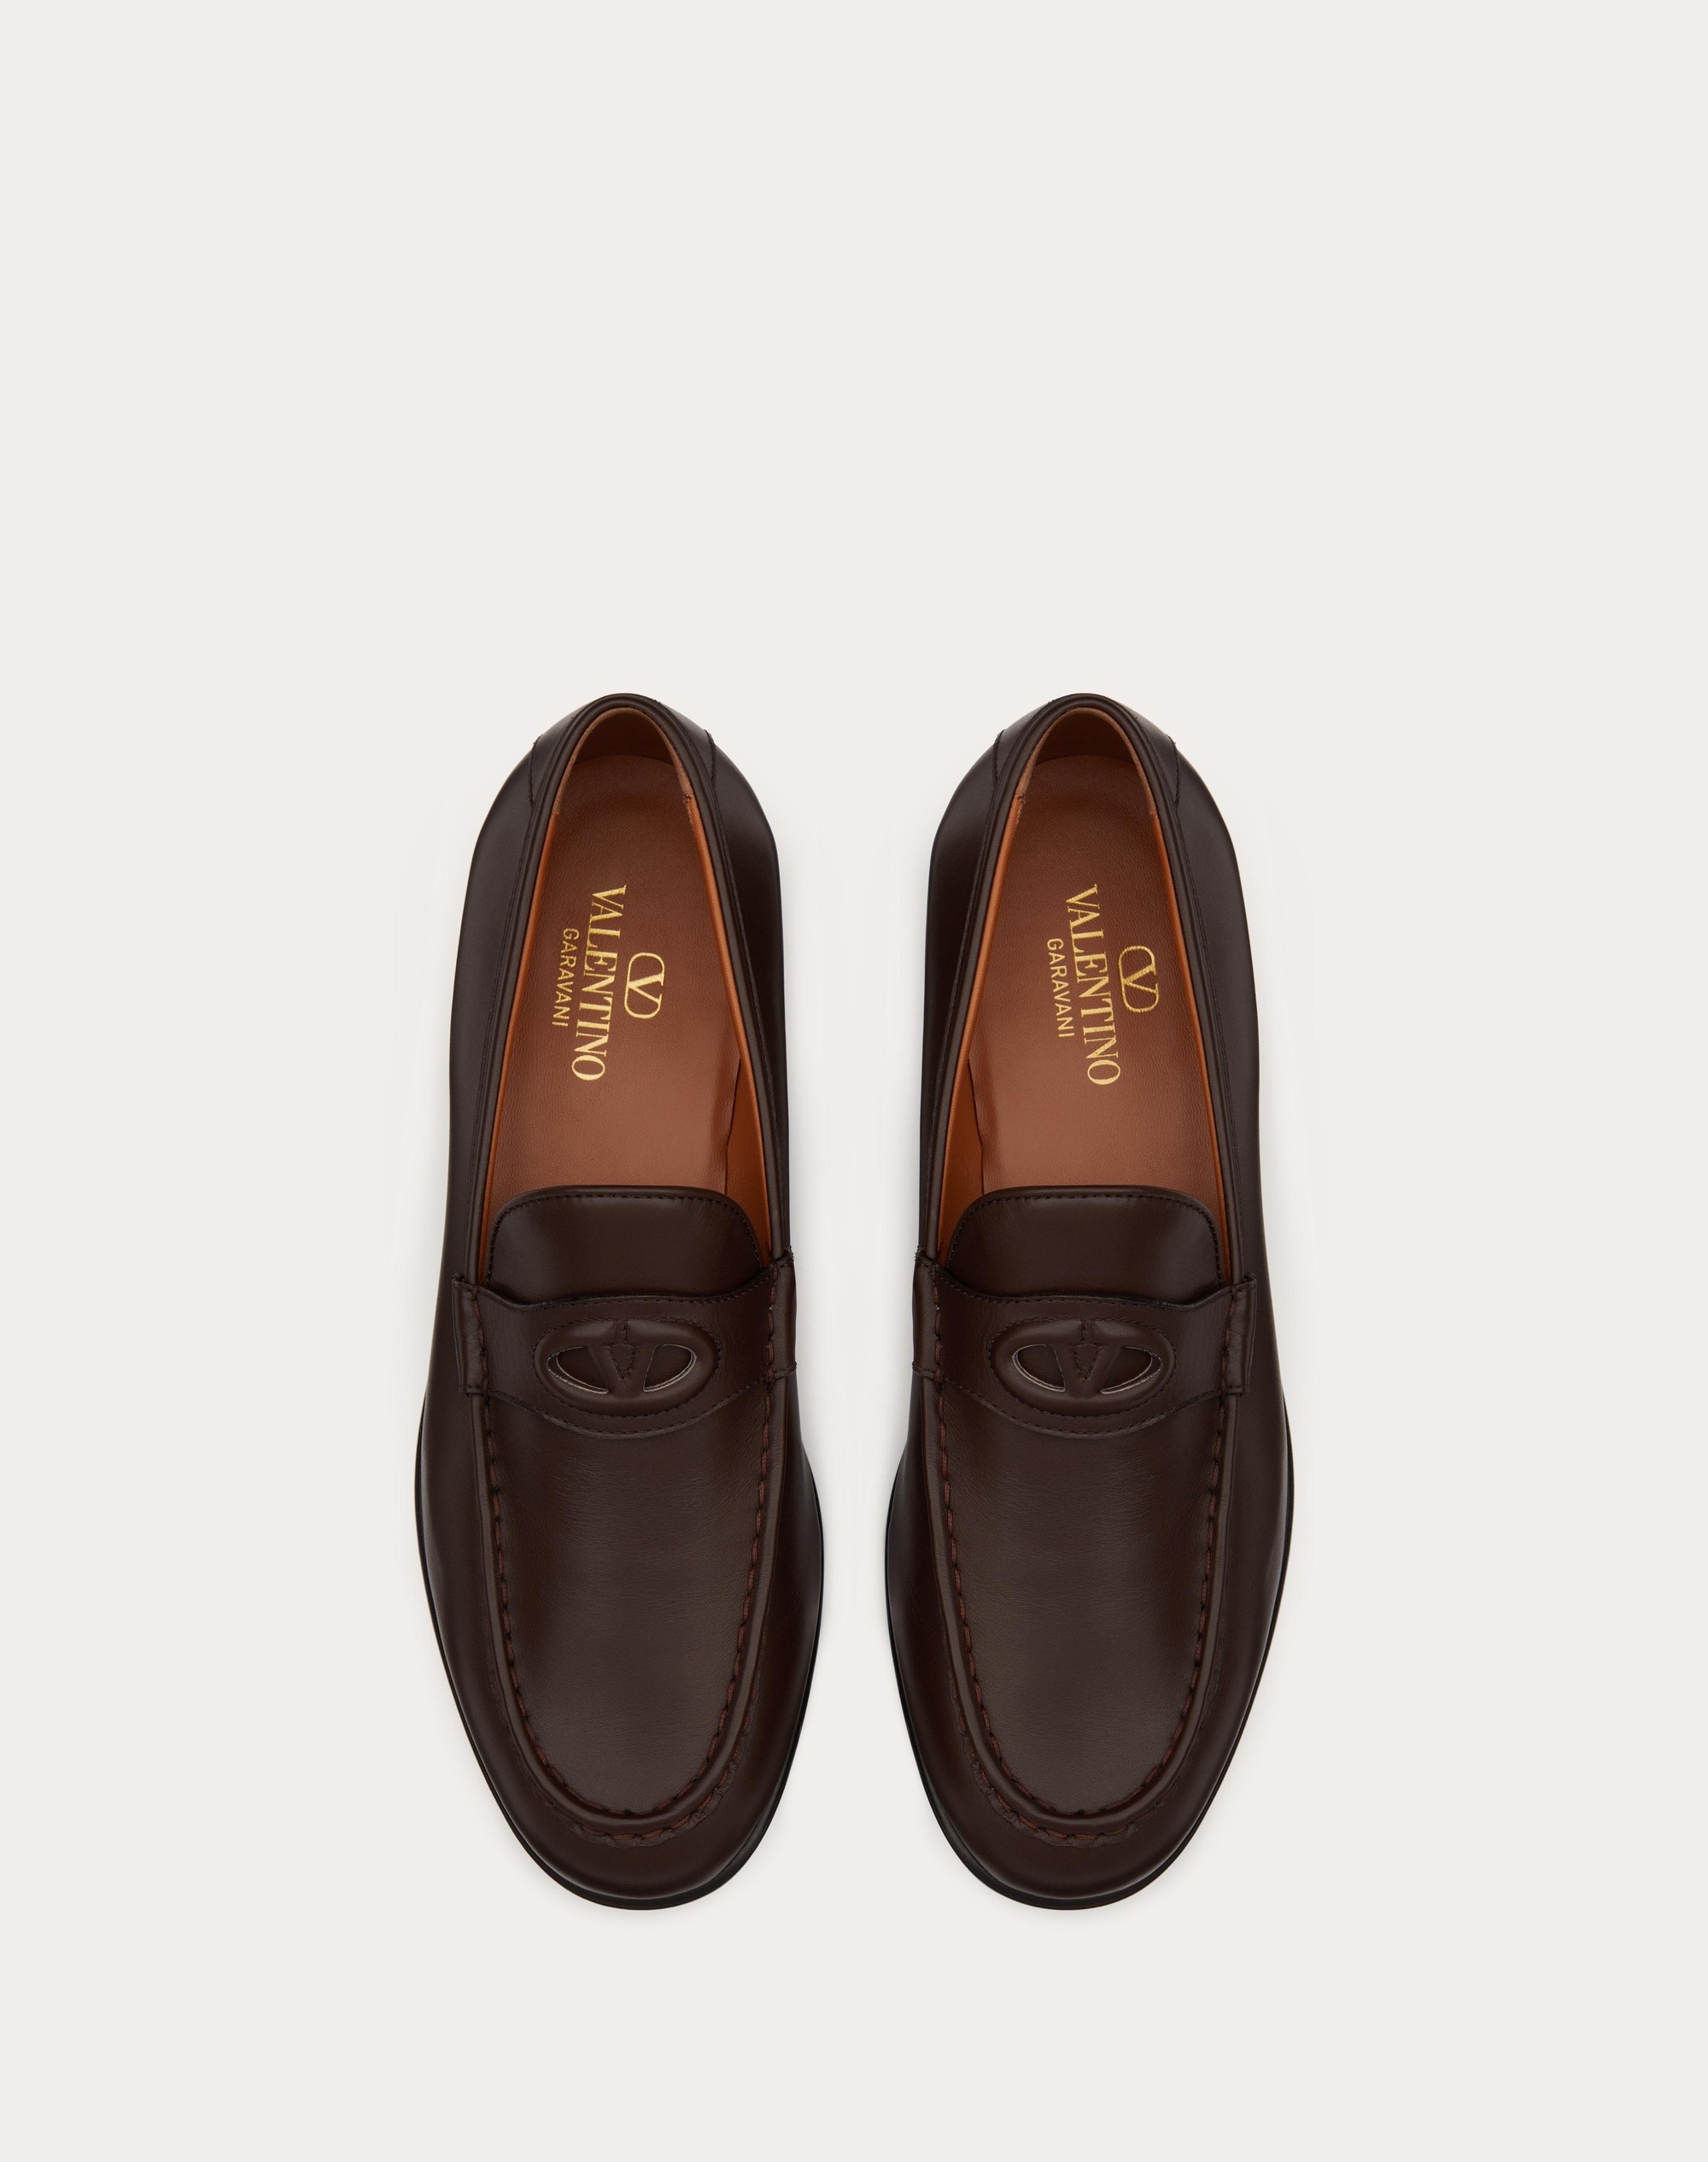 VLOGO THE BOLD EDITION CALFSKIN LEATHER LOAFER - 4